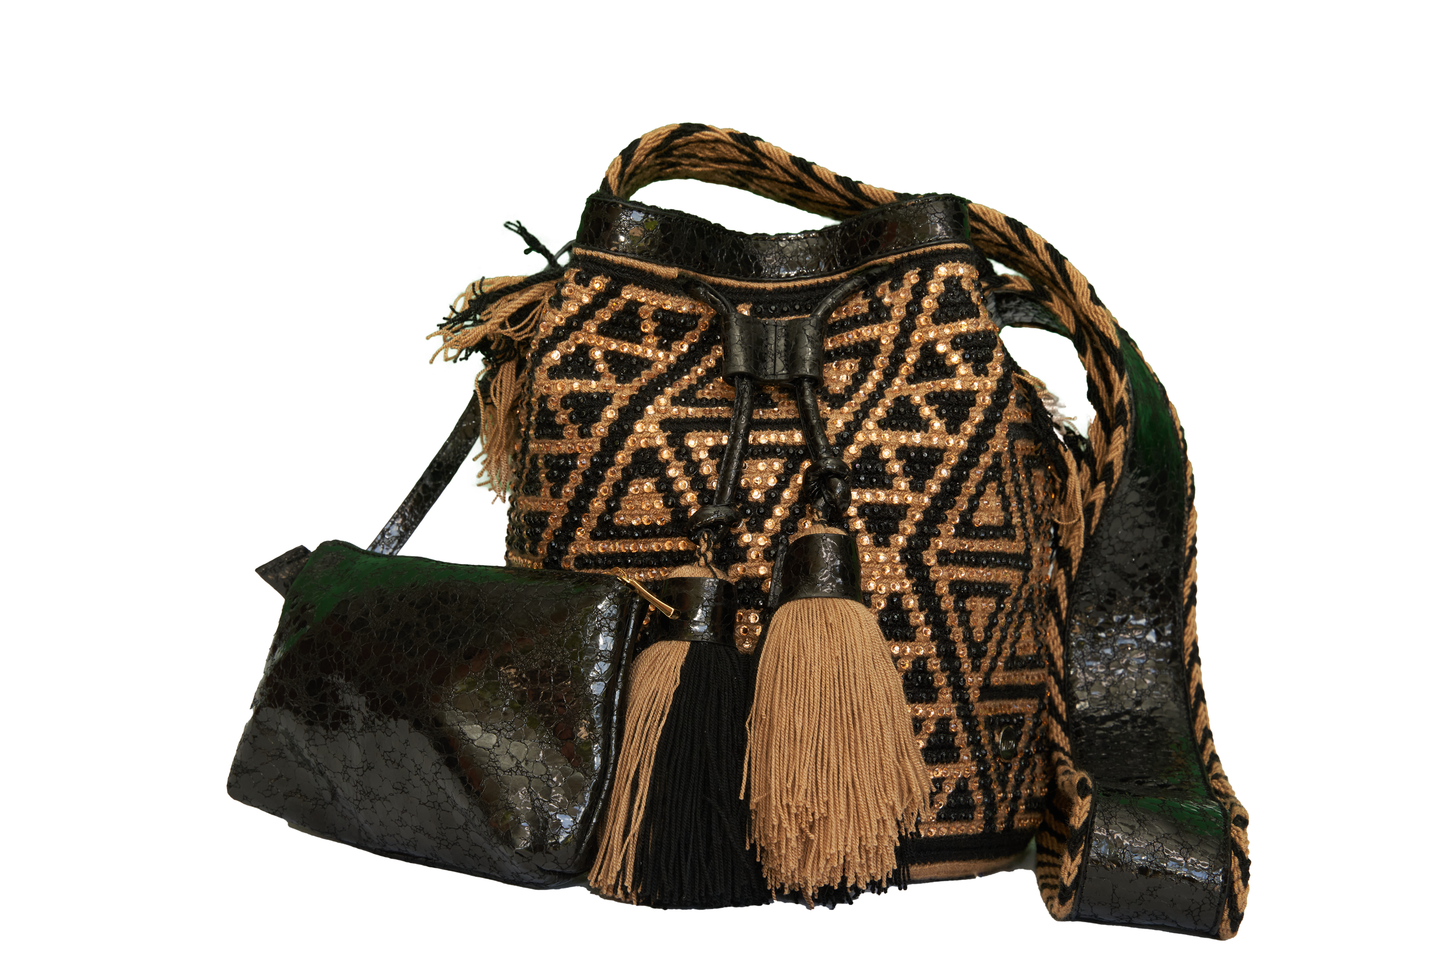 Black & Gold Leather Crochet Bag with Gems. The mochila also has 2 tassels and a smaller leather bag / compartment attached to the main mochila bag